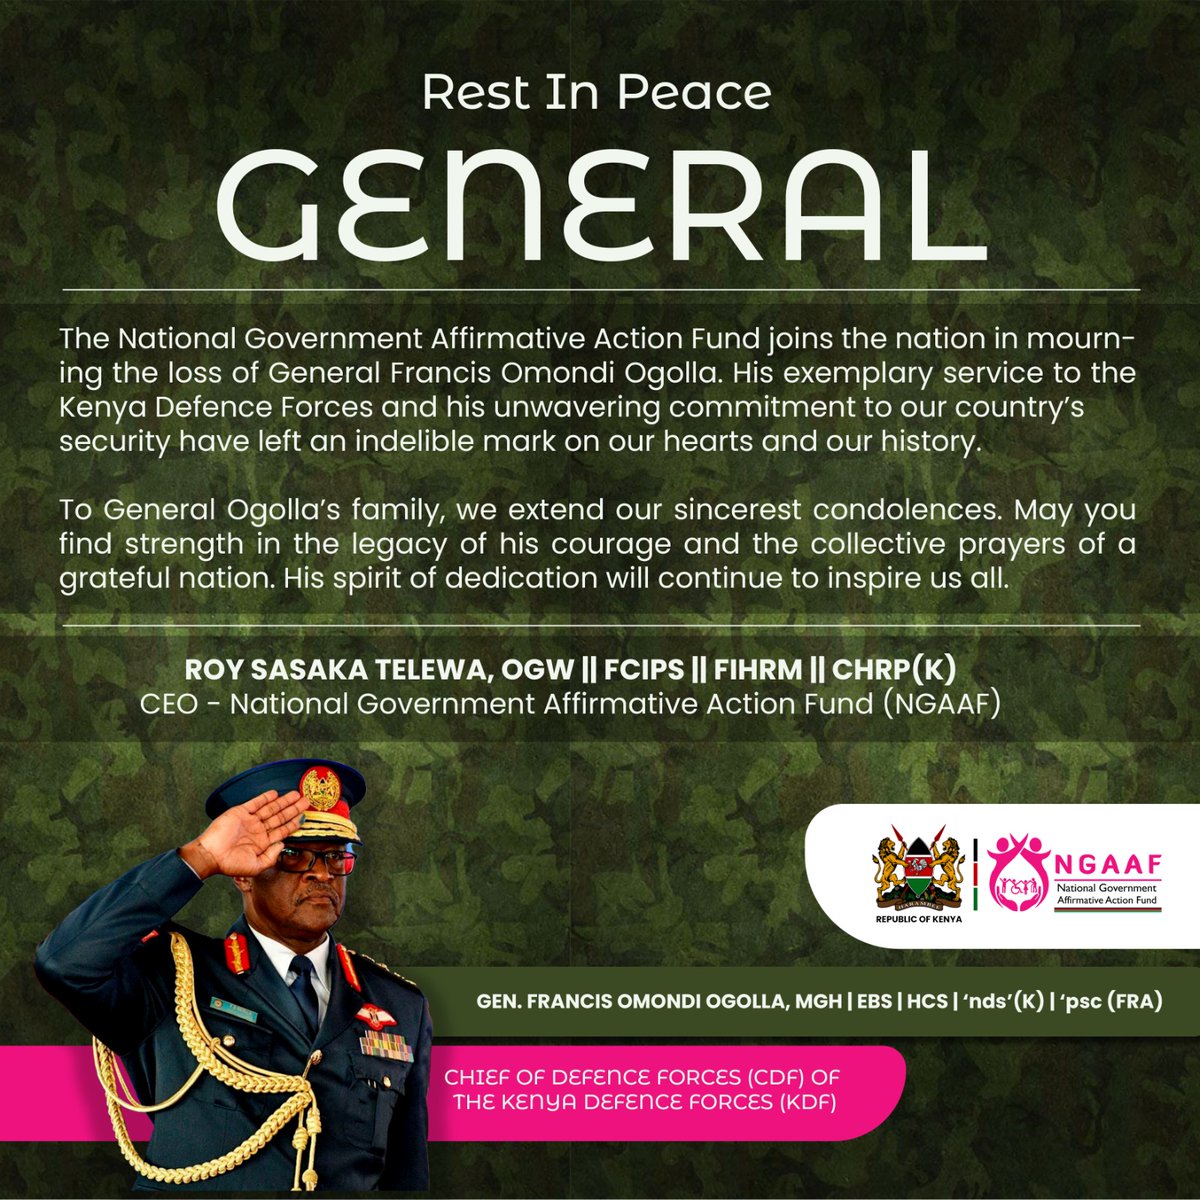 I am saddened by the passing of Gen.Francis Ogolla, and the valiant officers. Kenya mourns the loss of an esteemed leader. His commitment and contributions to Kenya will be forever cherished. My heartfelt sympathies go to all their loved ones, friends, and the KDF fraternity.